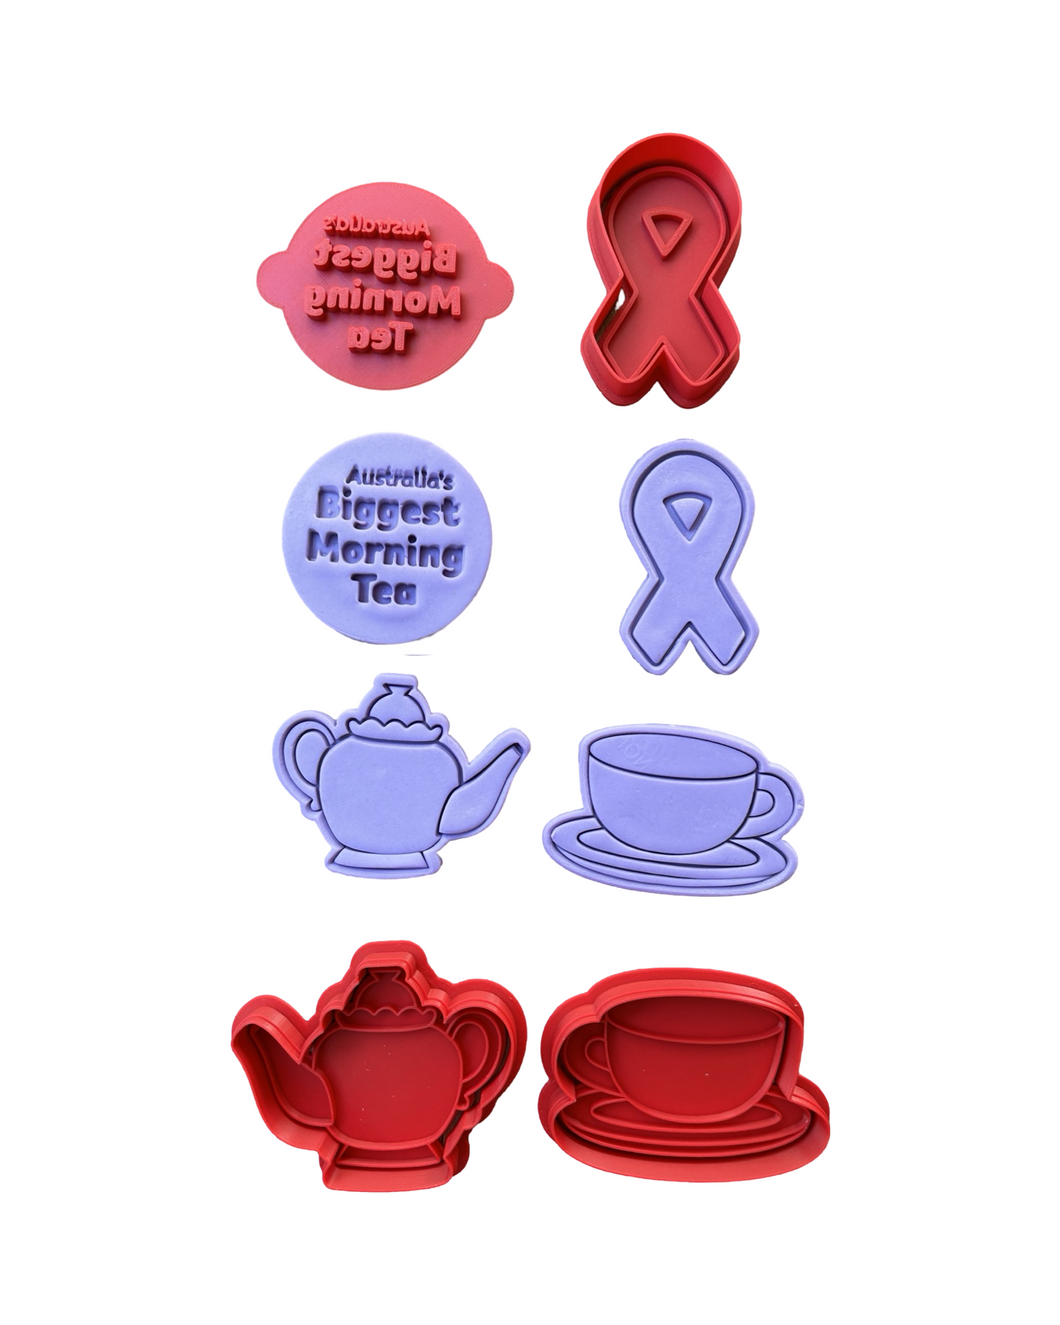 Biggest Morning Tea cookie stamp Cancer Council Teapot teacup cancer ribbon cookie cutter